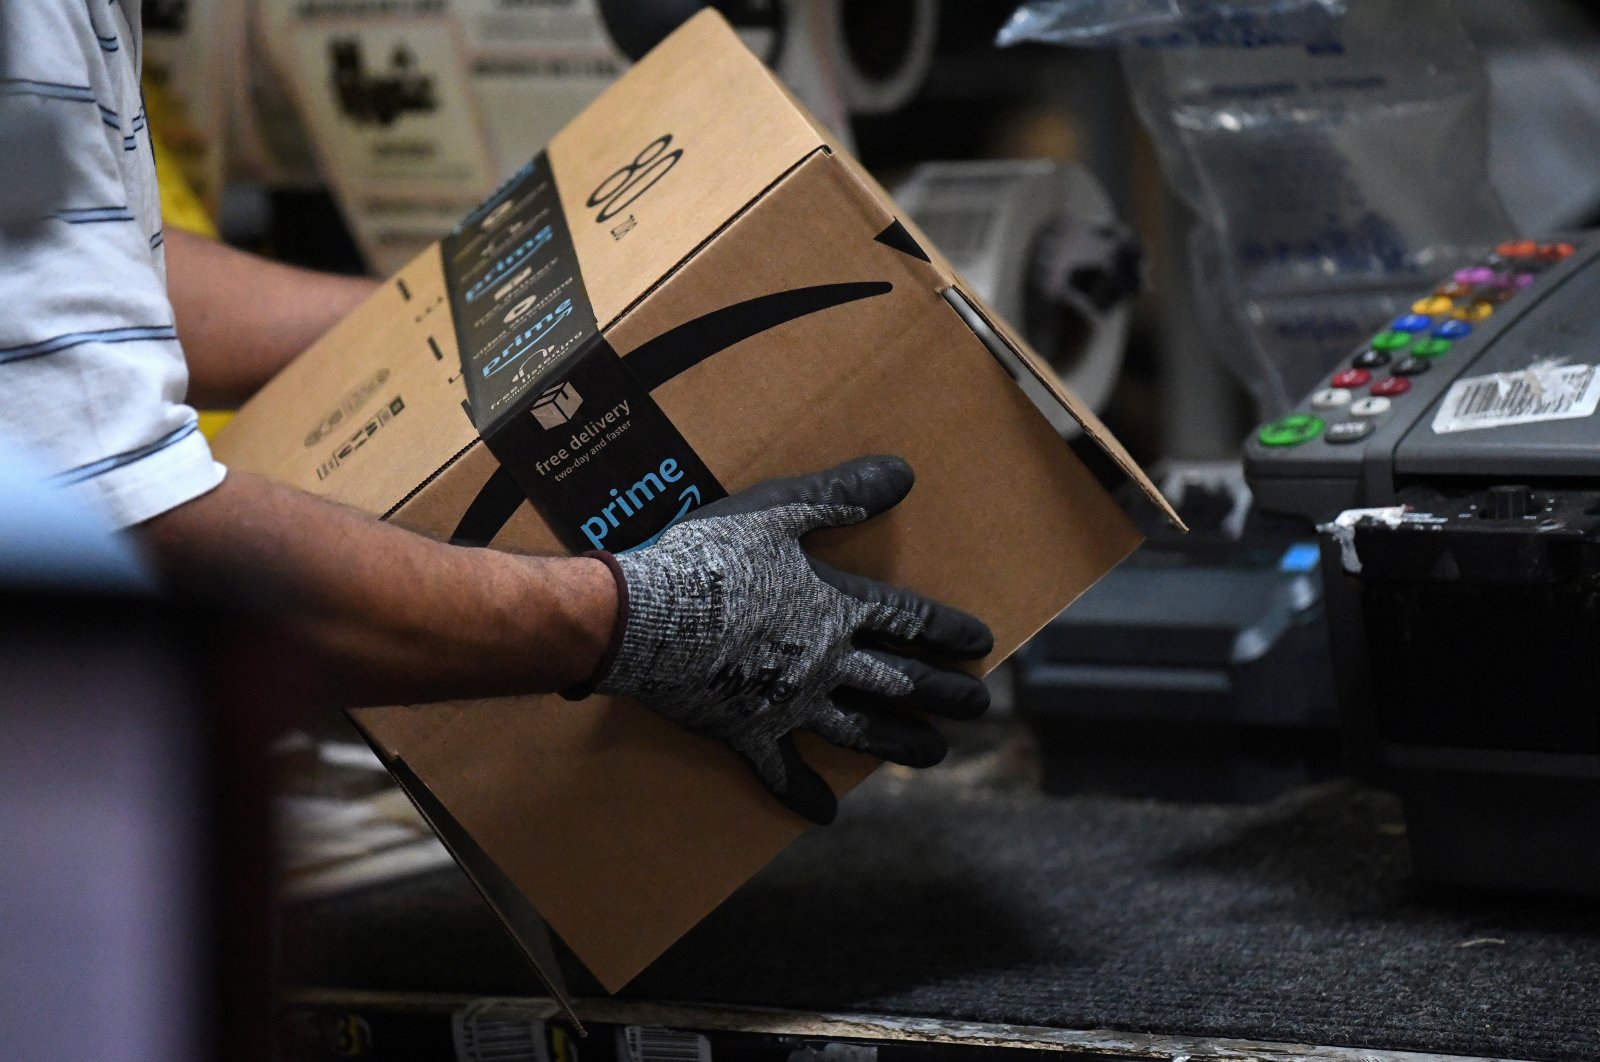 A worker assembles a box for delivery at the Amazon fulfillment center in Baltimore, Maryland, U.S., April 30, 2019. (Reuters Photo)